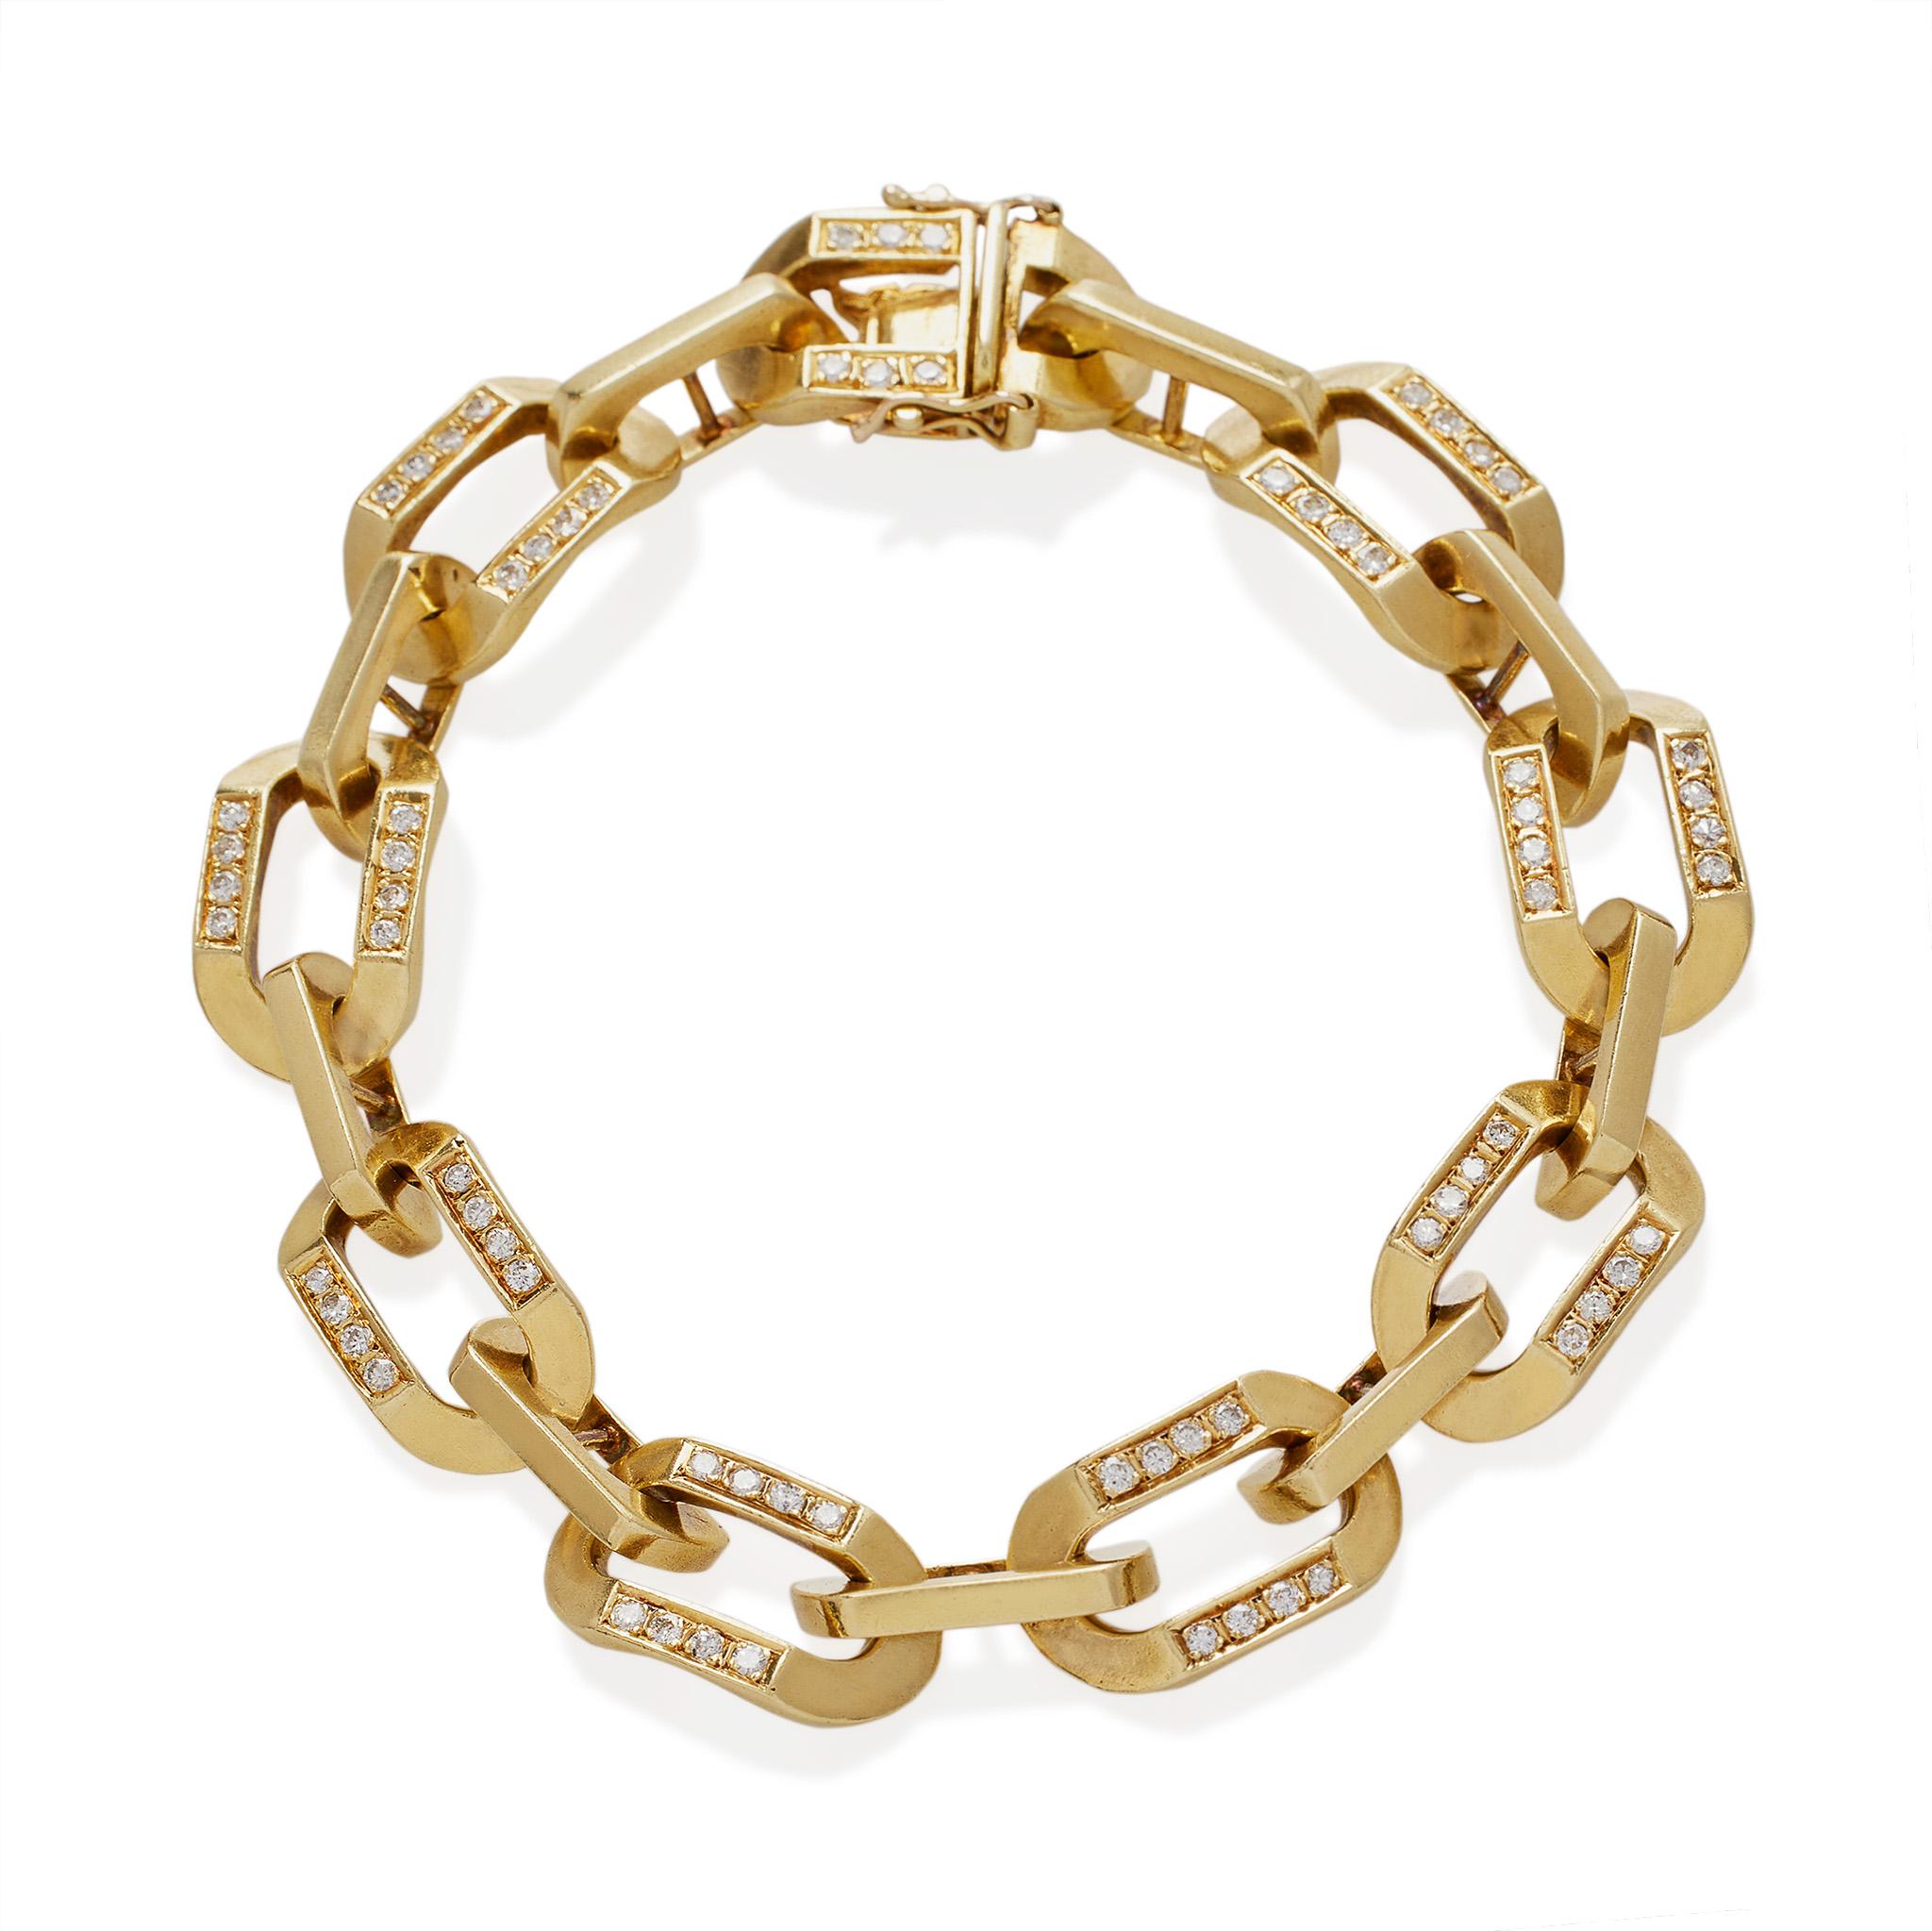 Created by Bulgari in the 1970s, this bracelet is composed of 18K gold and diamonds. Its oversize trace links are highlighted by lines of round brilliant-cut diamonds. With its bold, oversize links joined by arched links and highlighted by sparkling